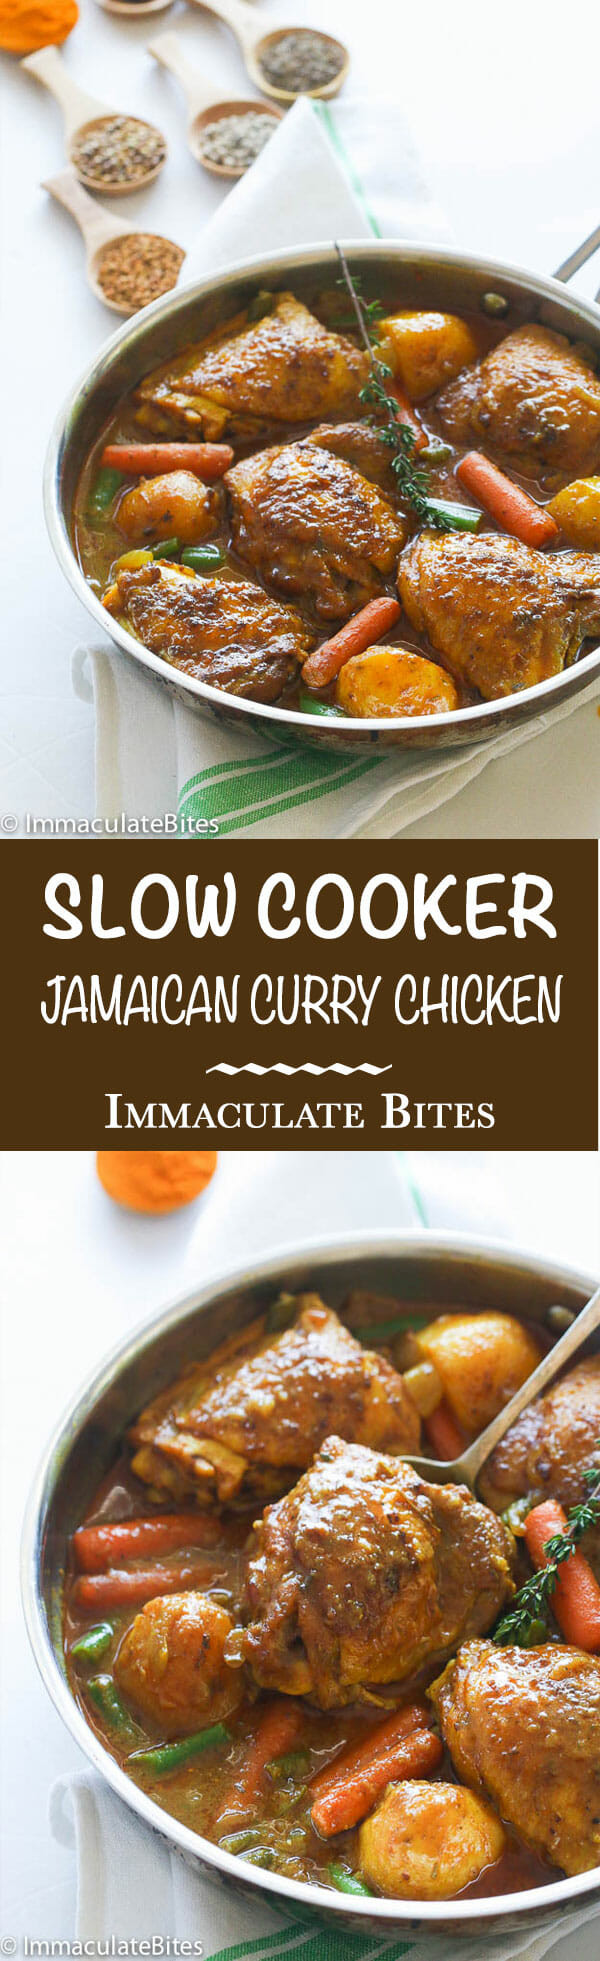 Slow Cooker Chicken Thighs Curry
 Slow Cooker Jamaican Curry Chicken Immaculate Bites